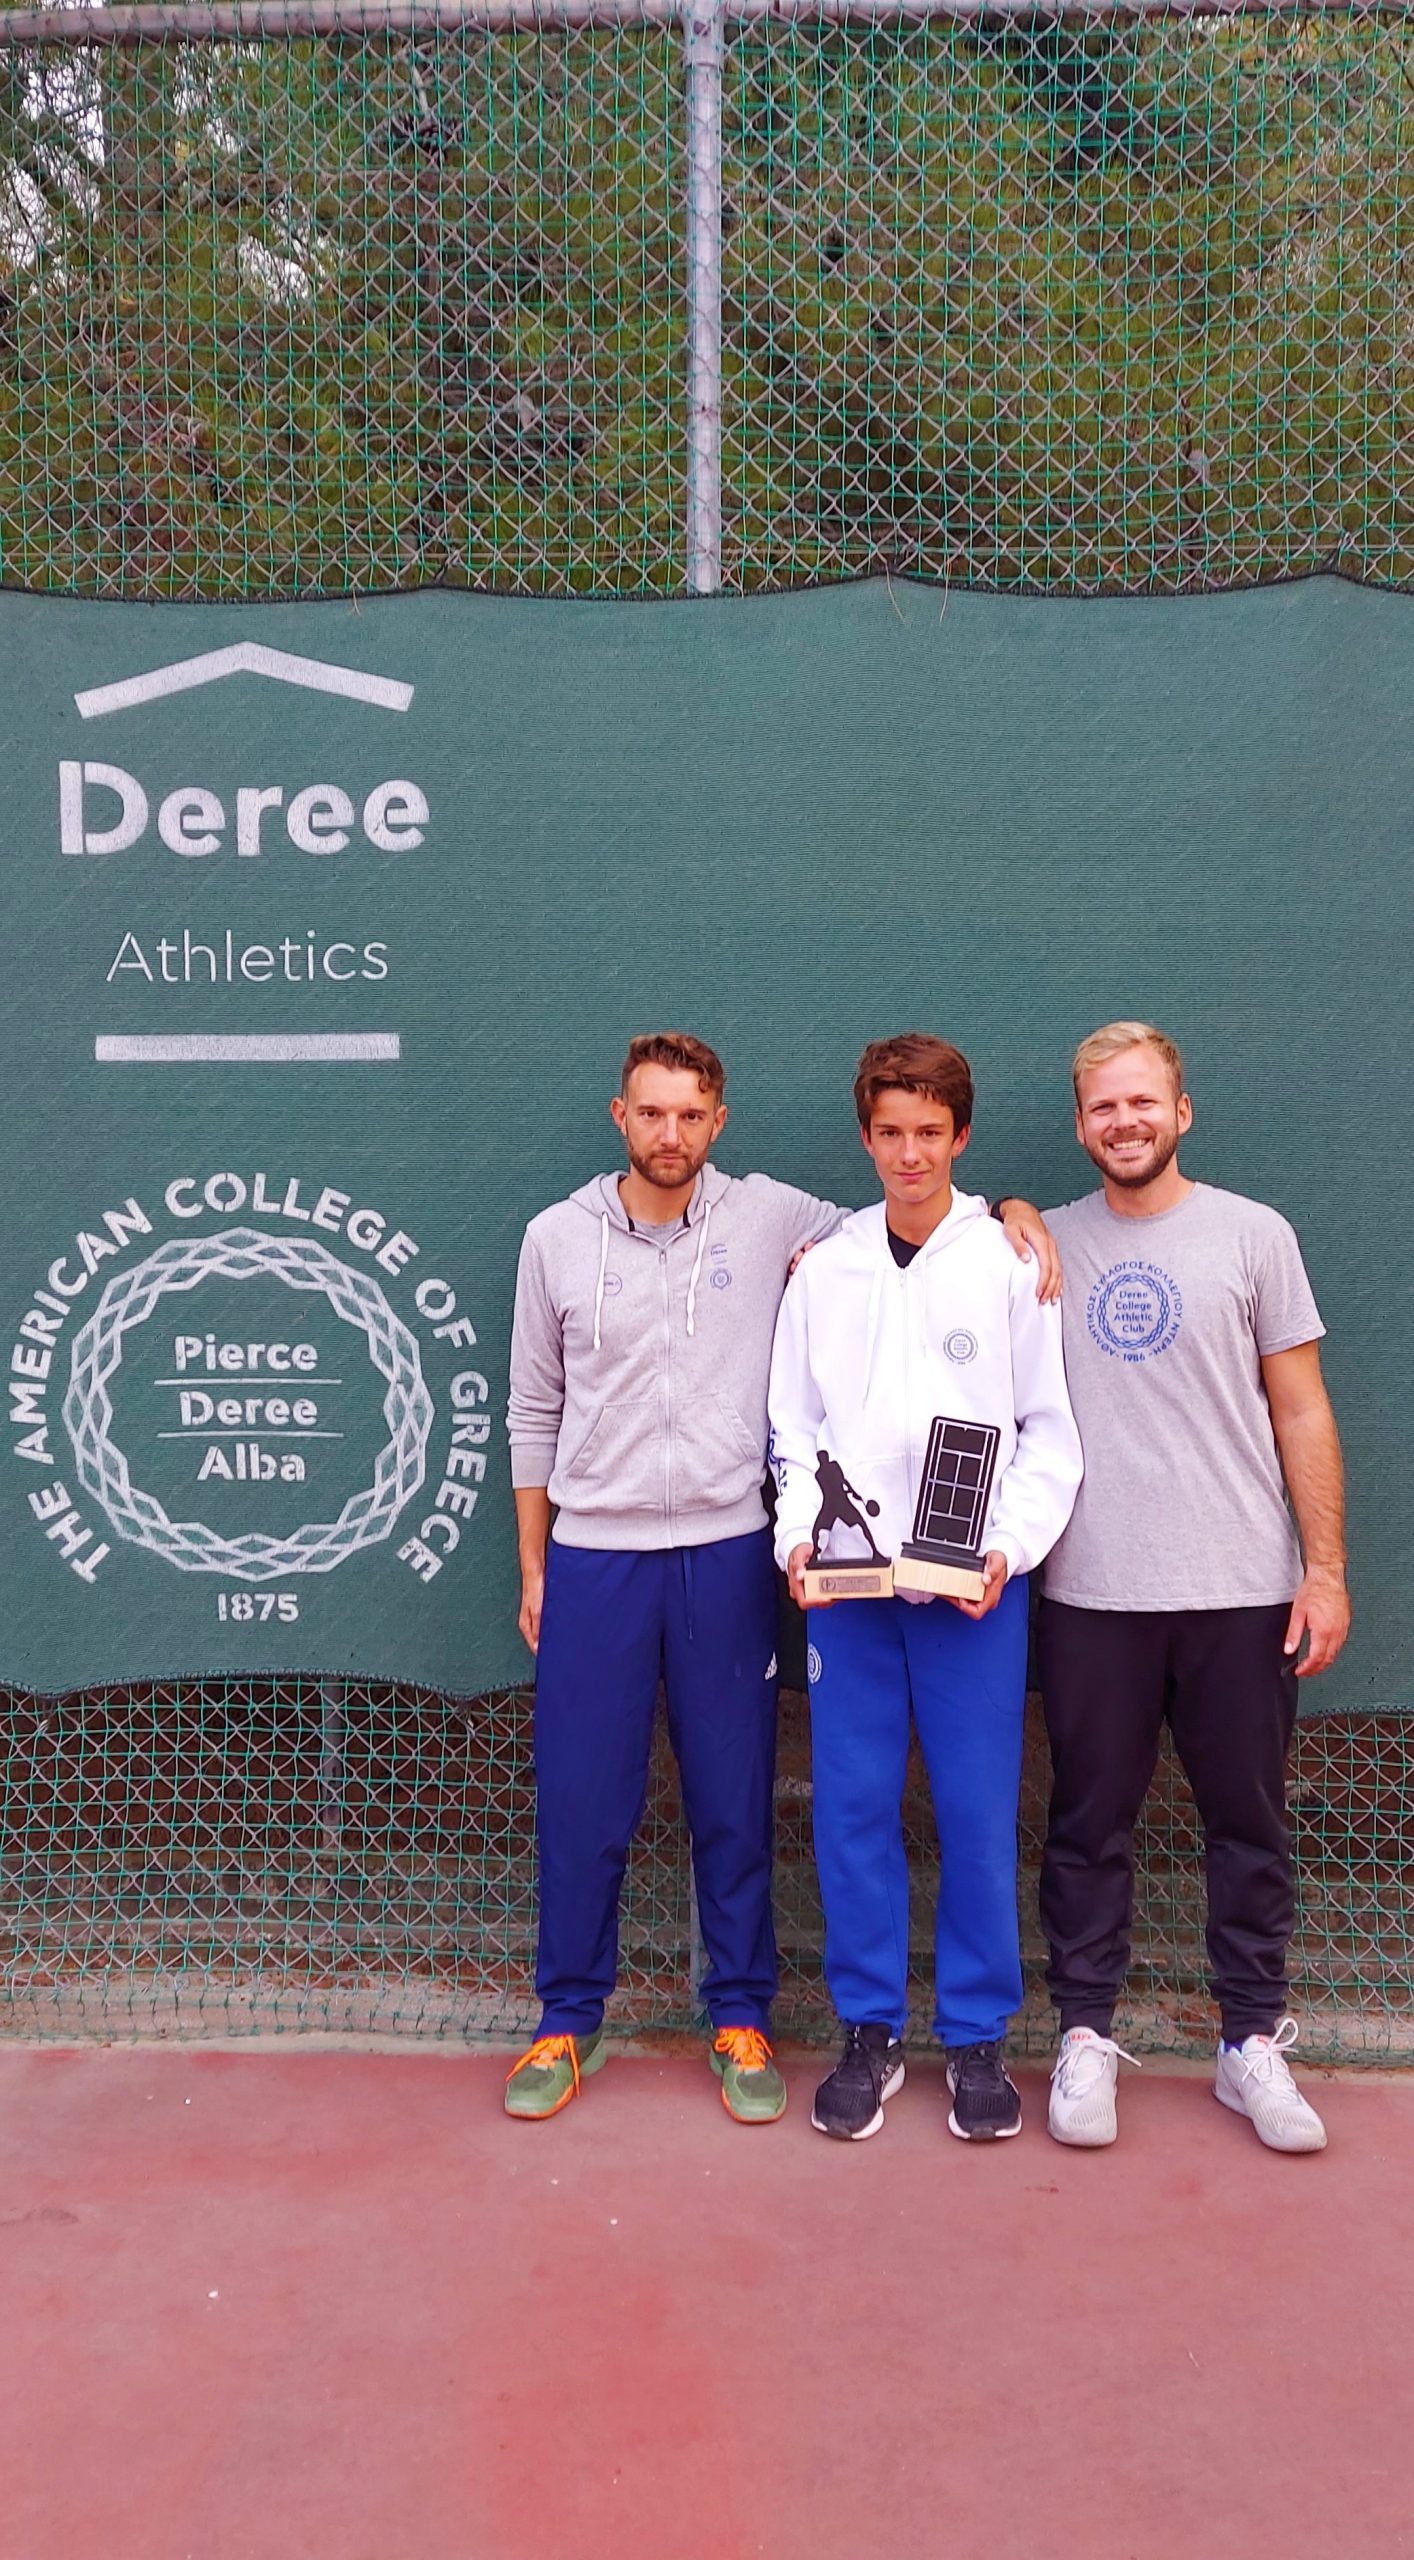 Distinctions for the Deree Tennis Academy at the E2 tournament!